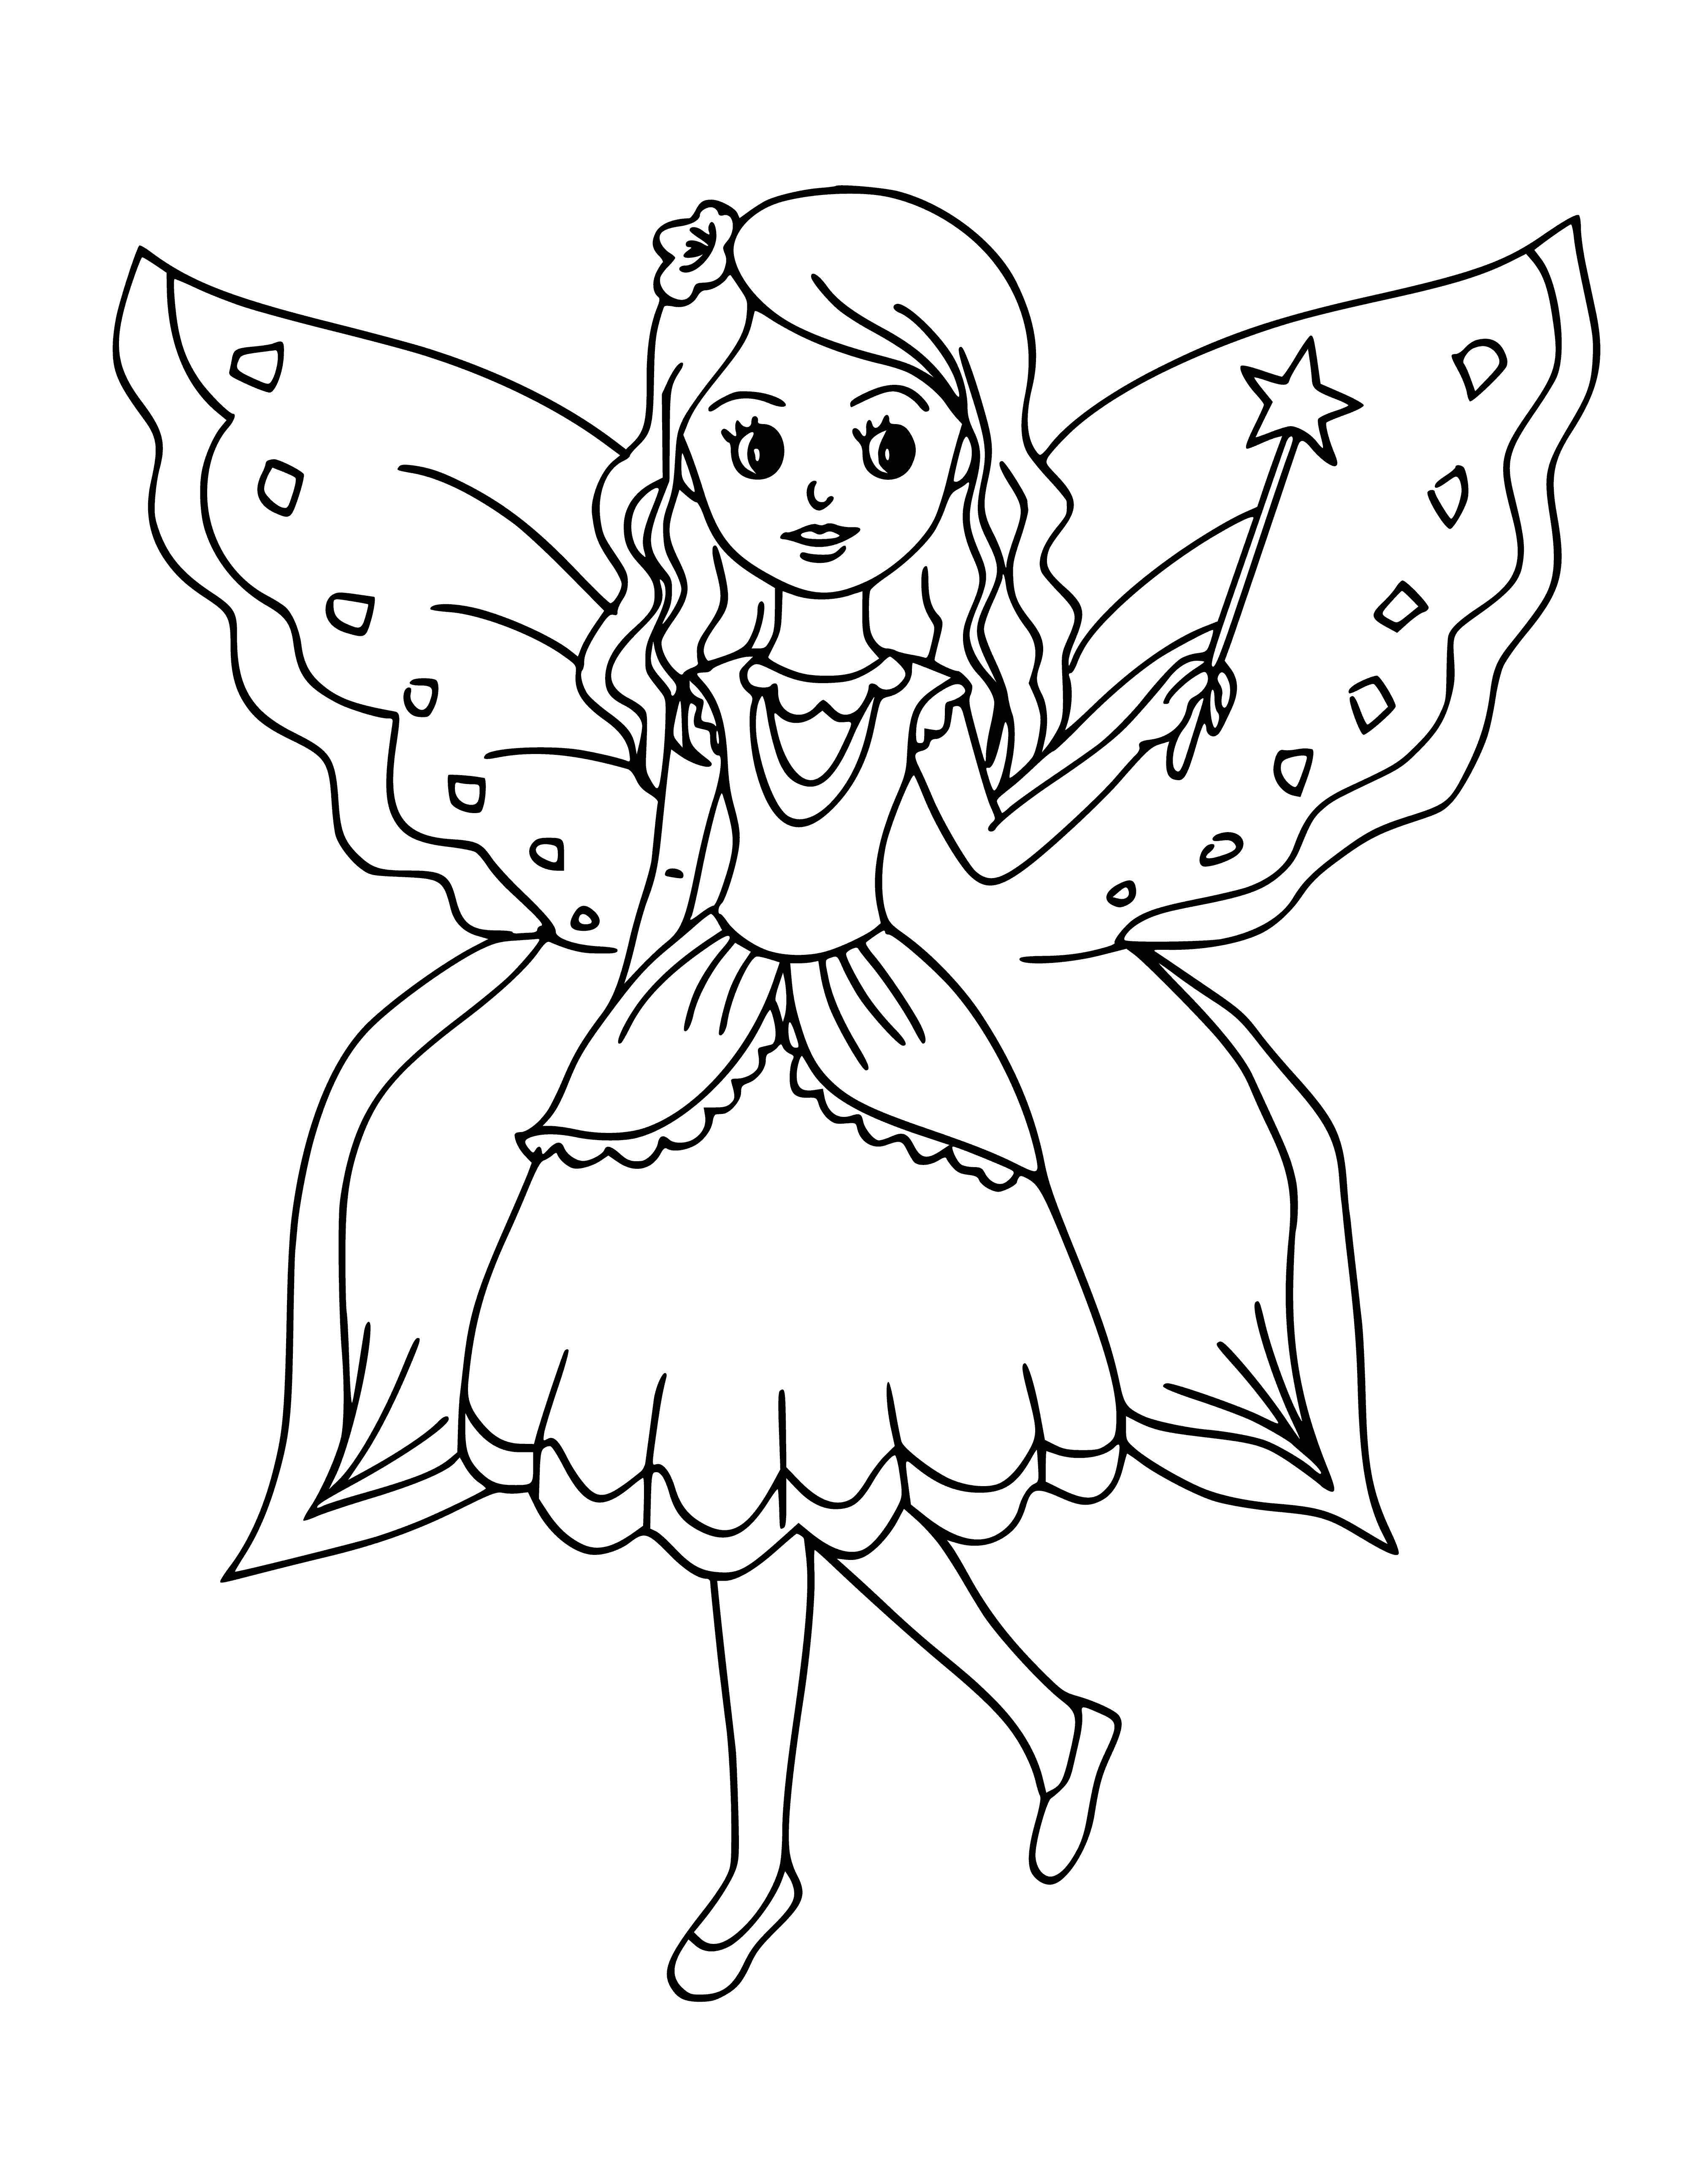 Fairy girl coloring page